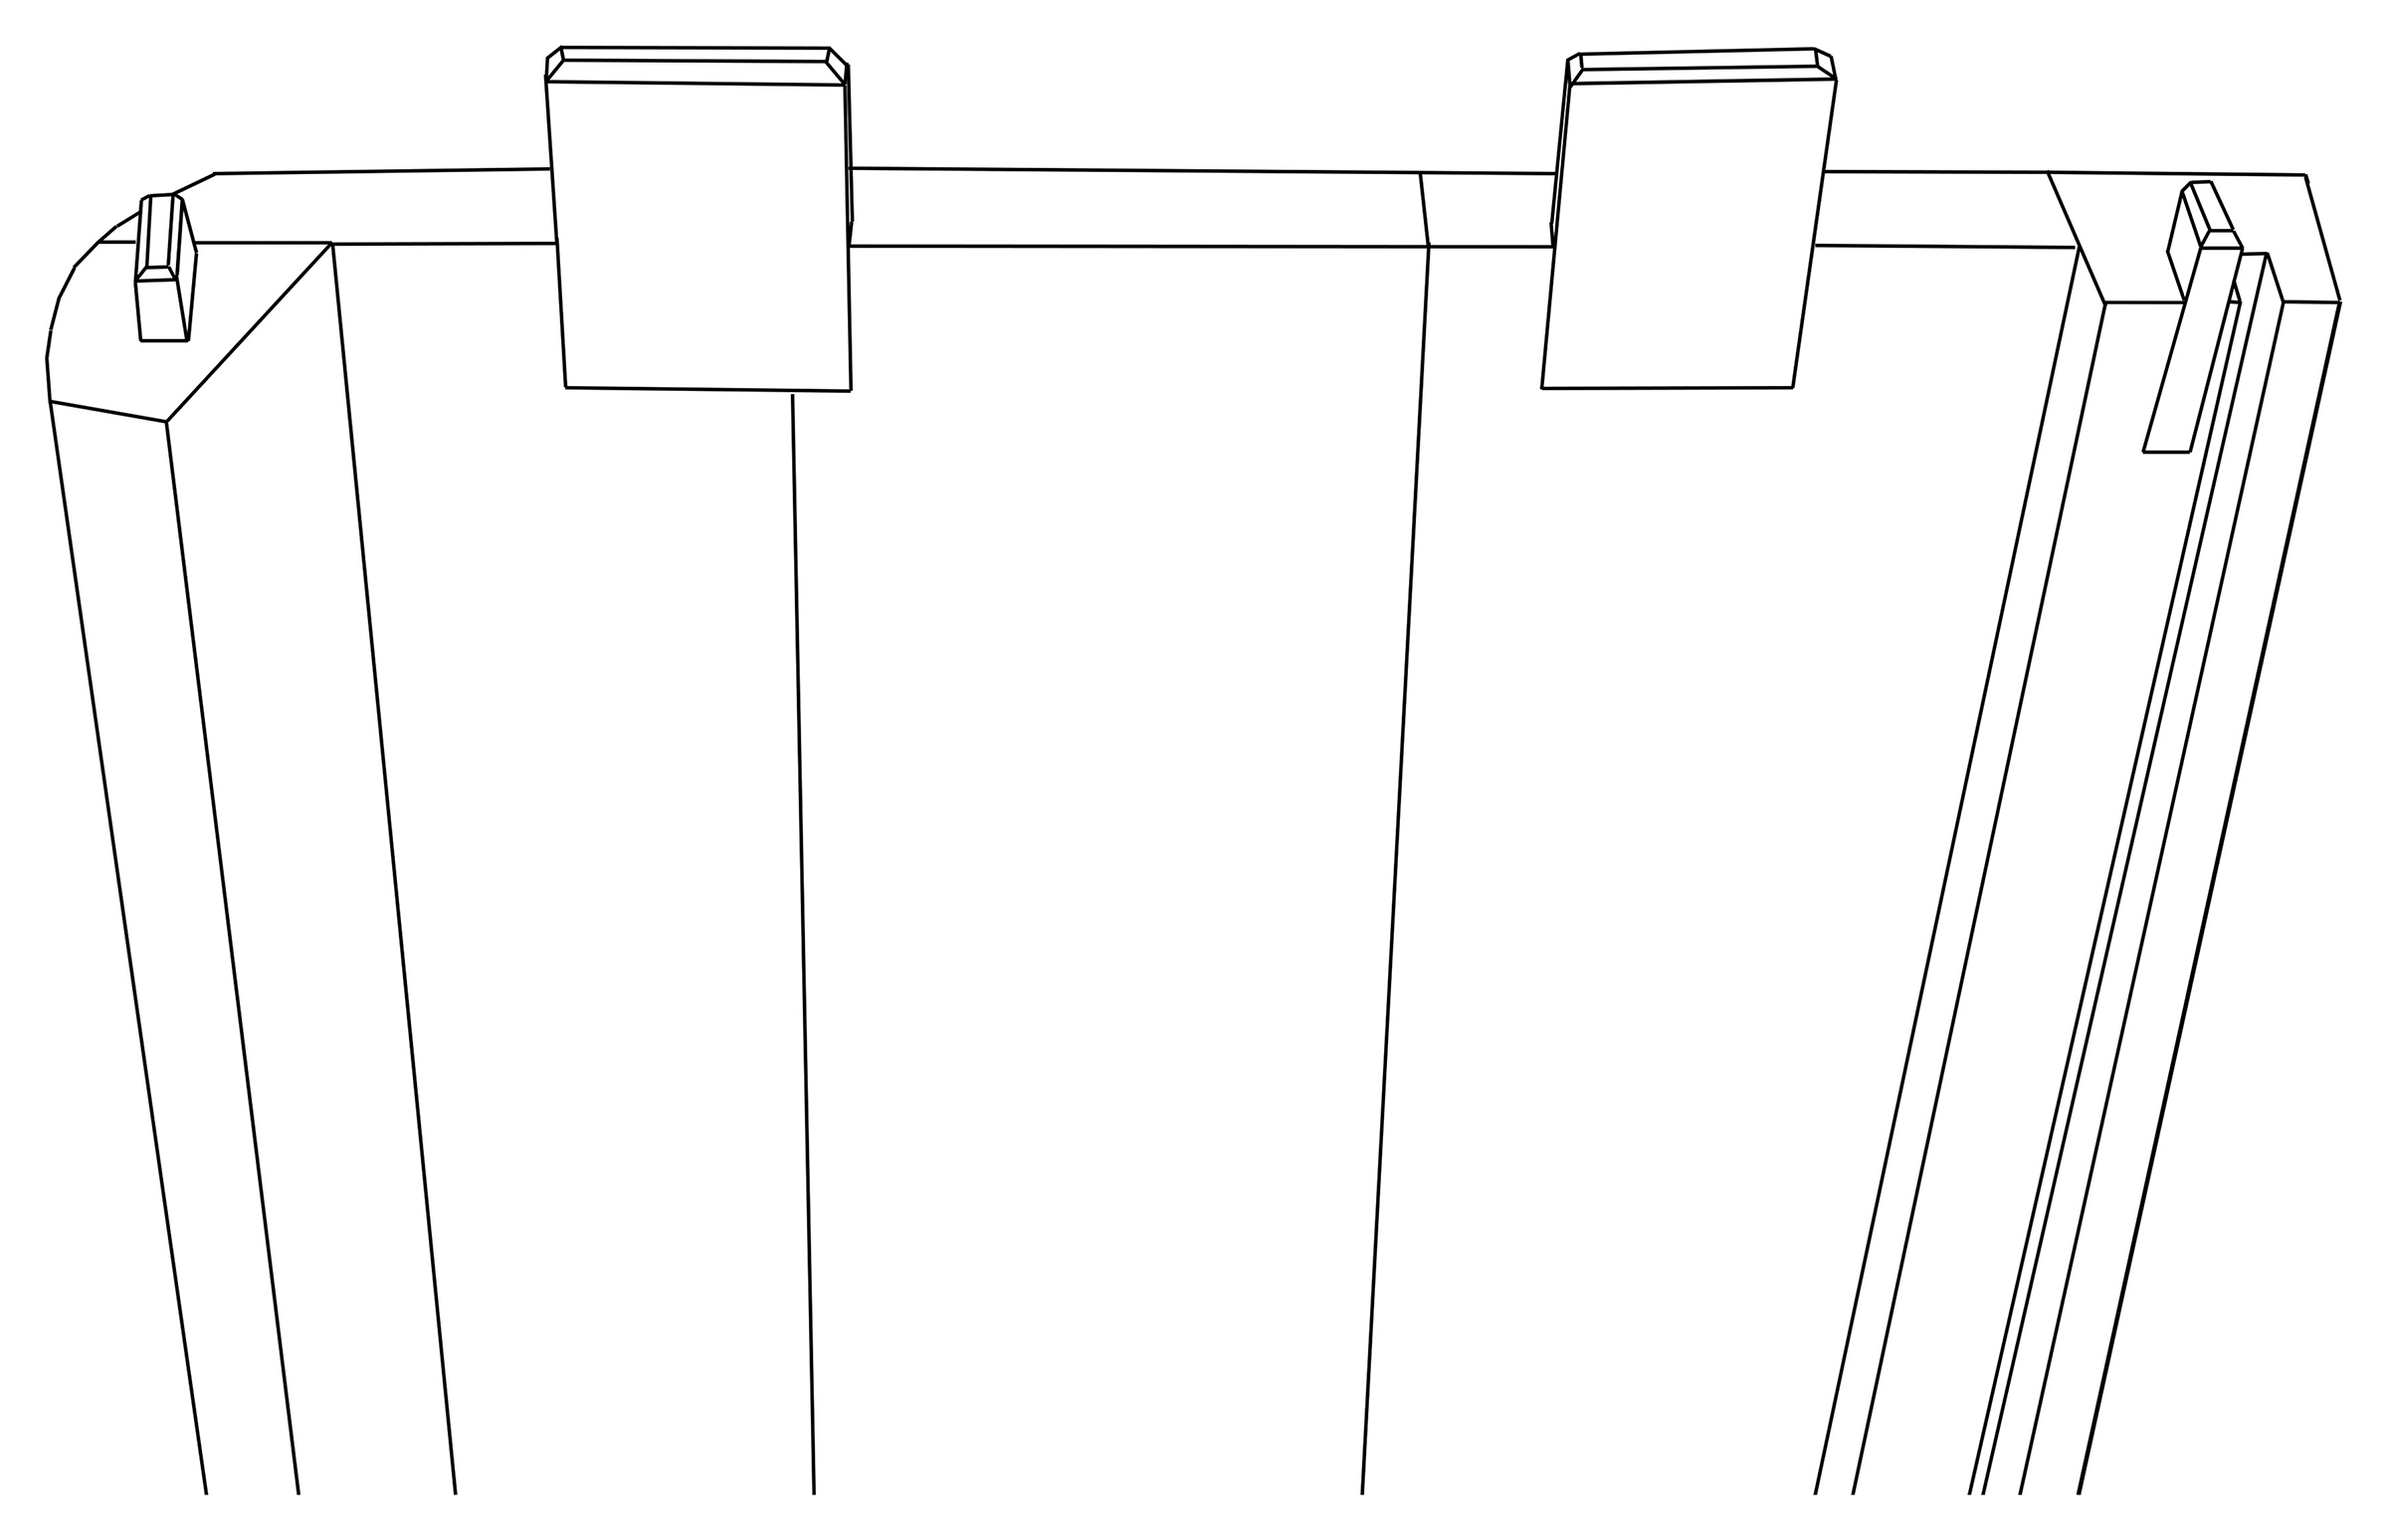 diagram of cabinet construction showing three parallel, upright side panels, two tabs on top, and more square end pieces on either side